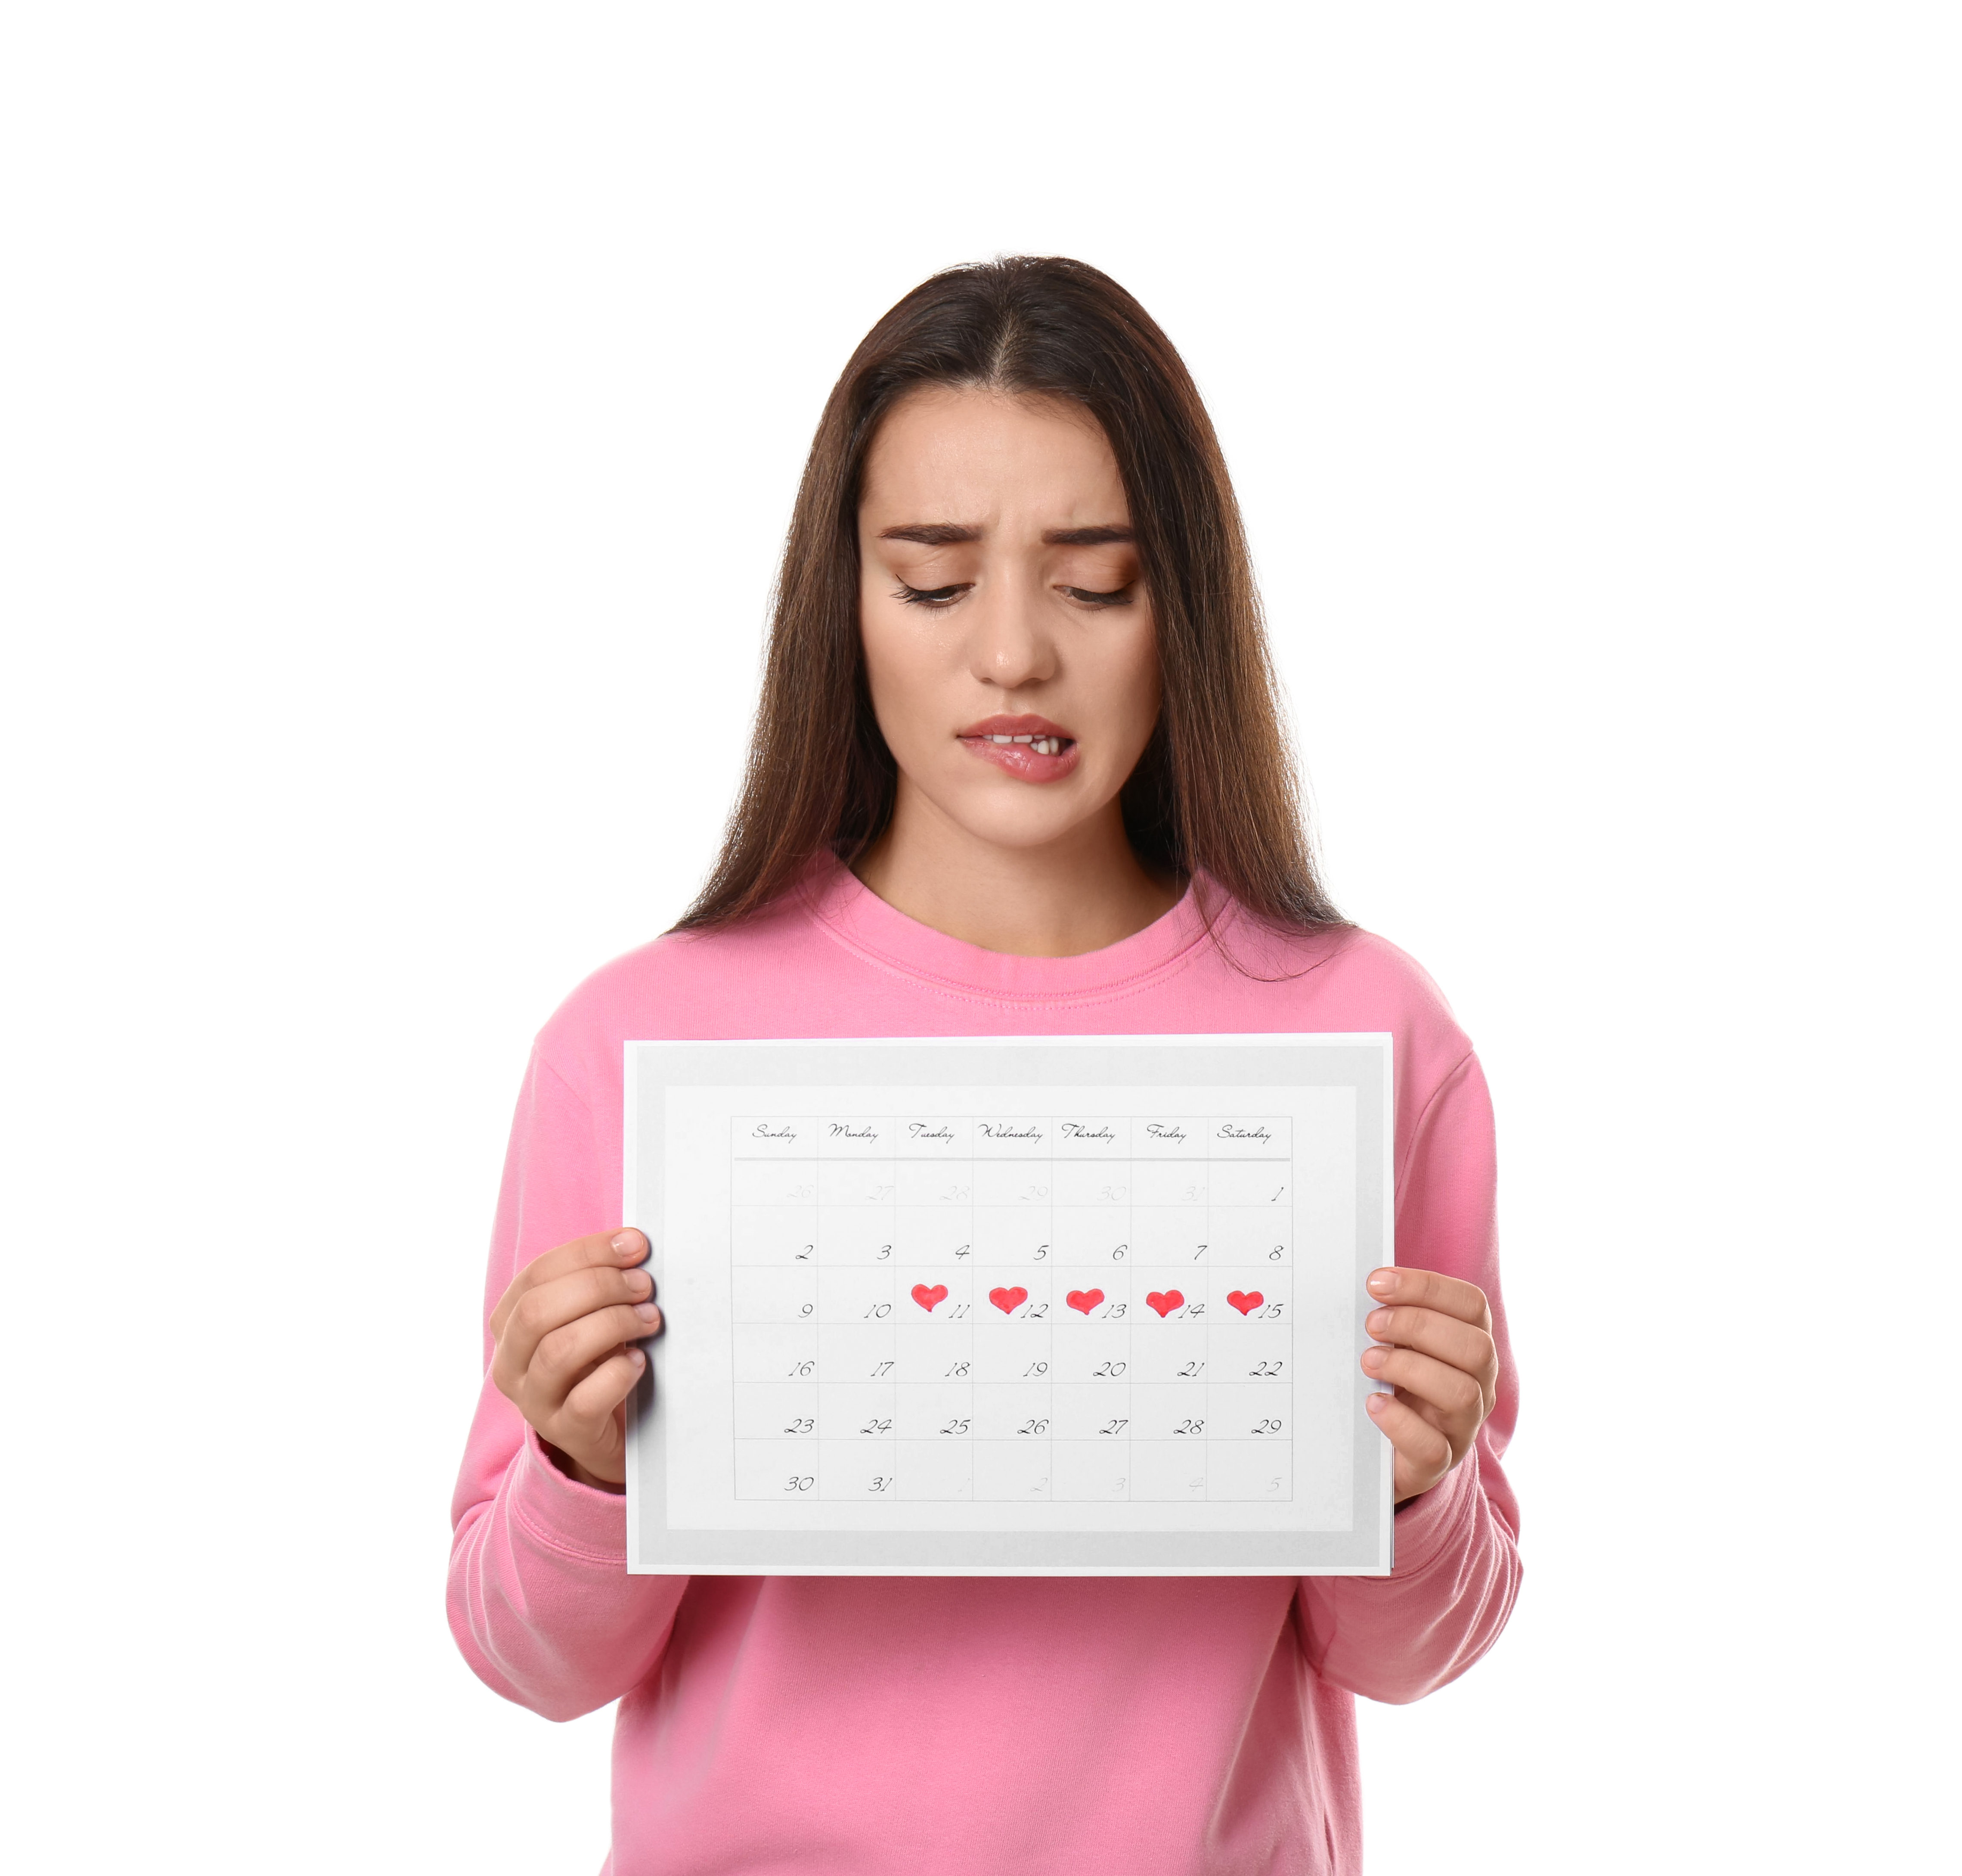 A woman holding up a calendar with hearts on it.